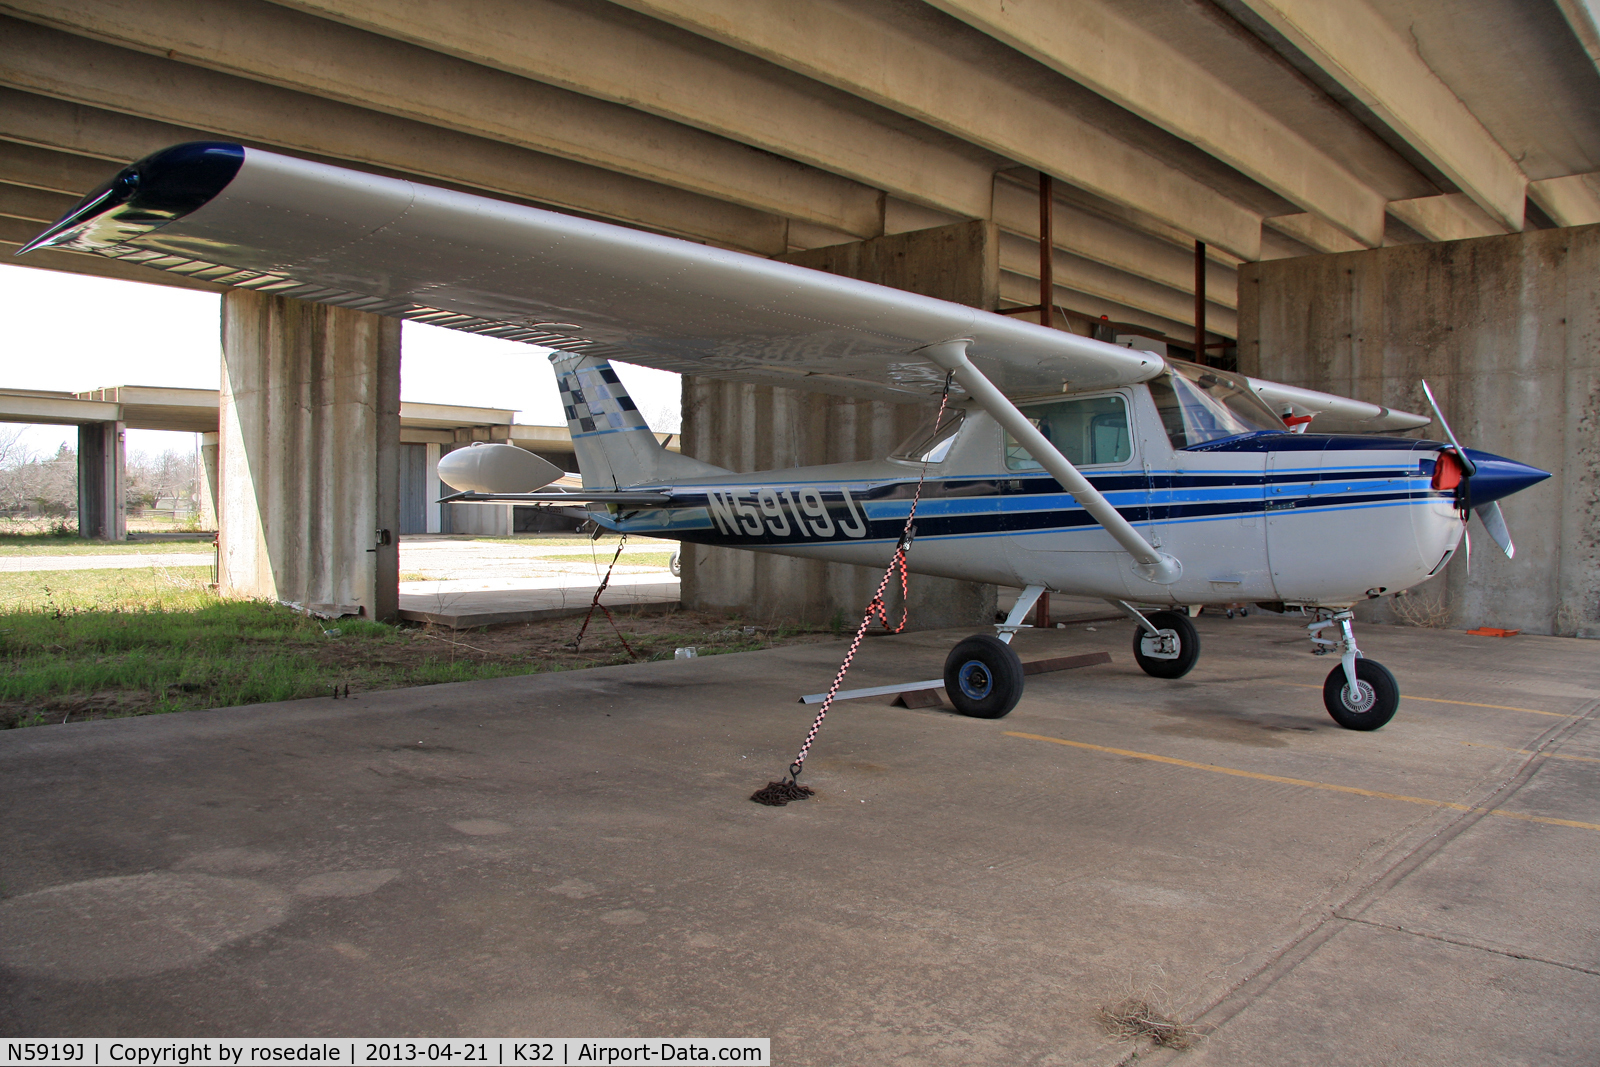 N5919J, 1970 Cessna A150K Aerobat C/N A1500219, At her home airfield of Riverside, Wichita, KS before the airport was closed for development